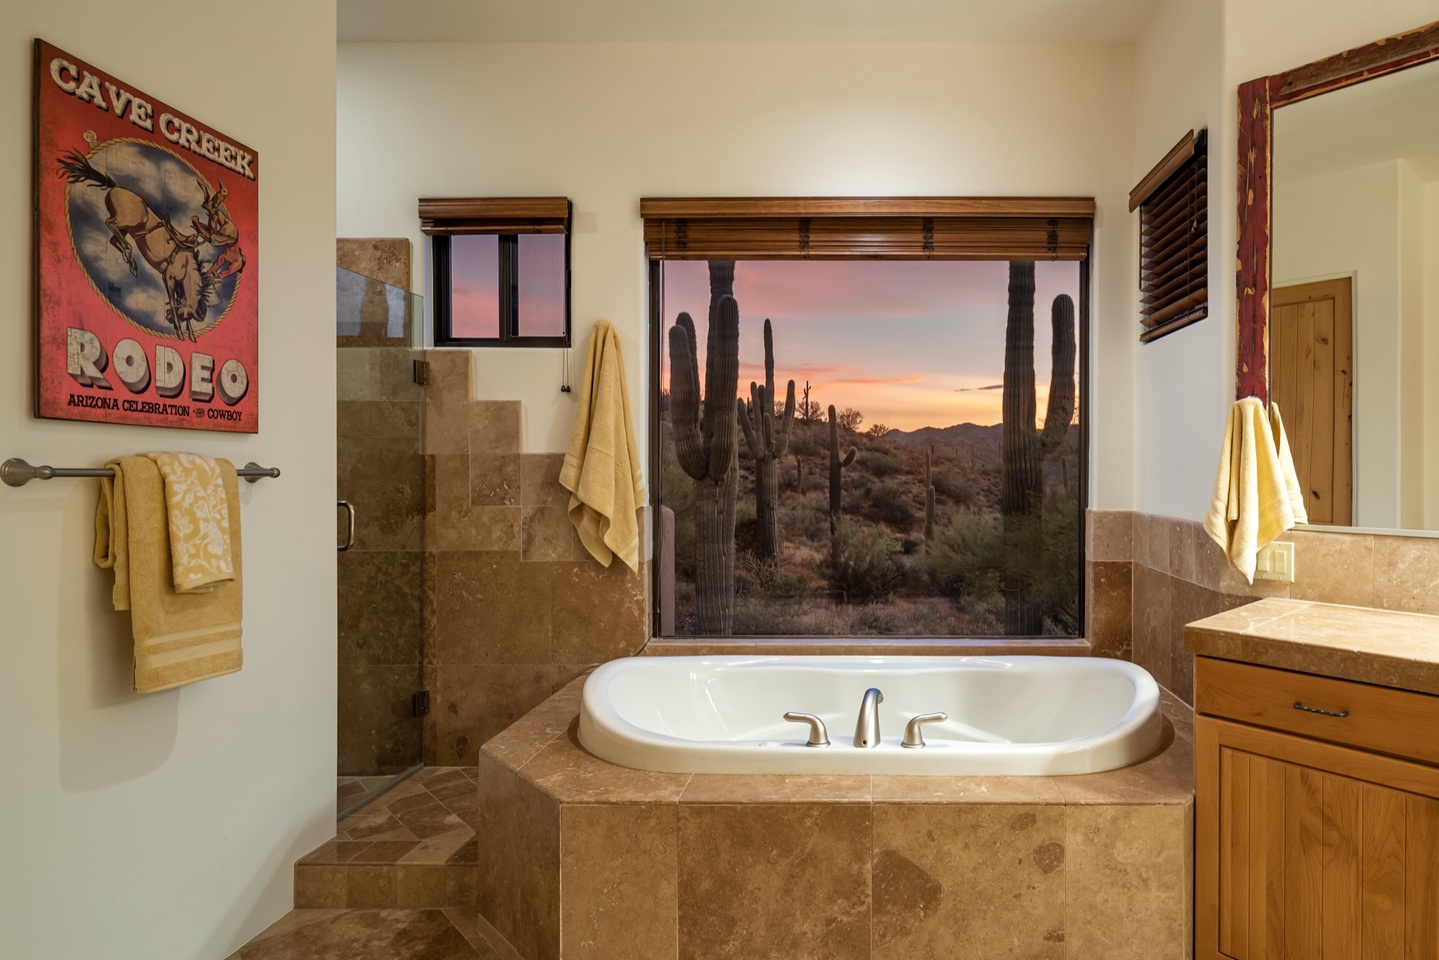 Jetted tub, large walk in shower, and yes... more views